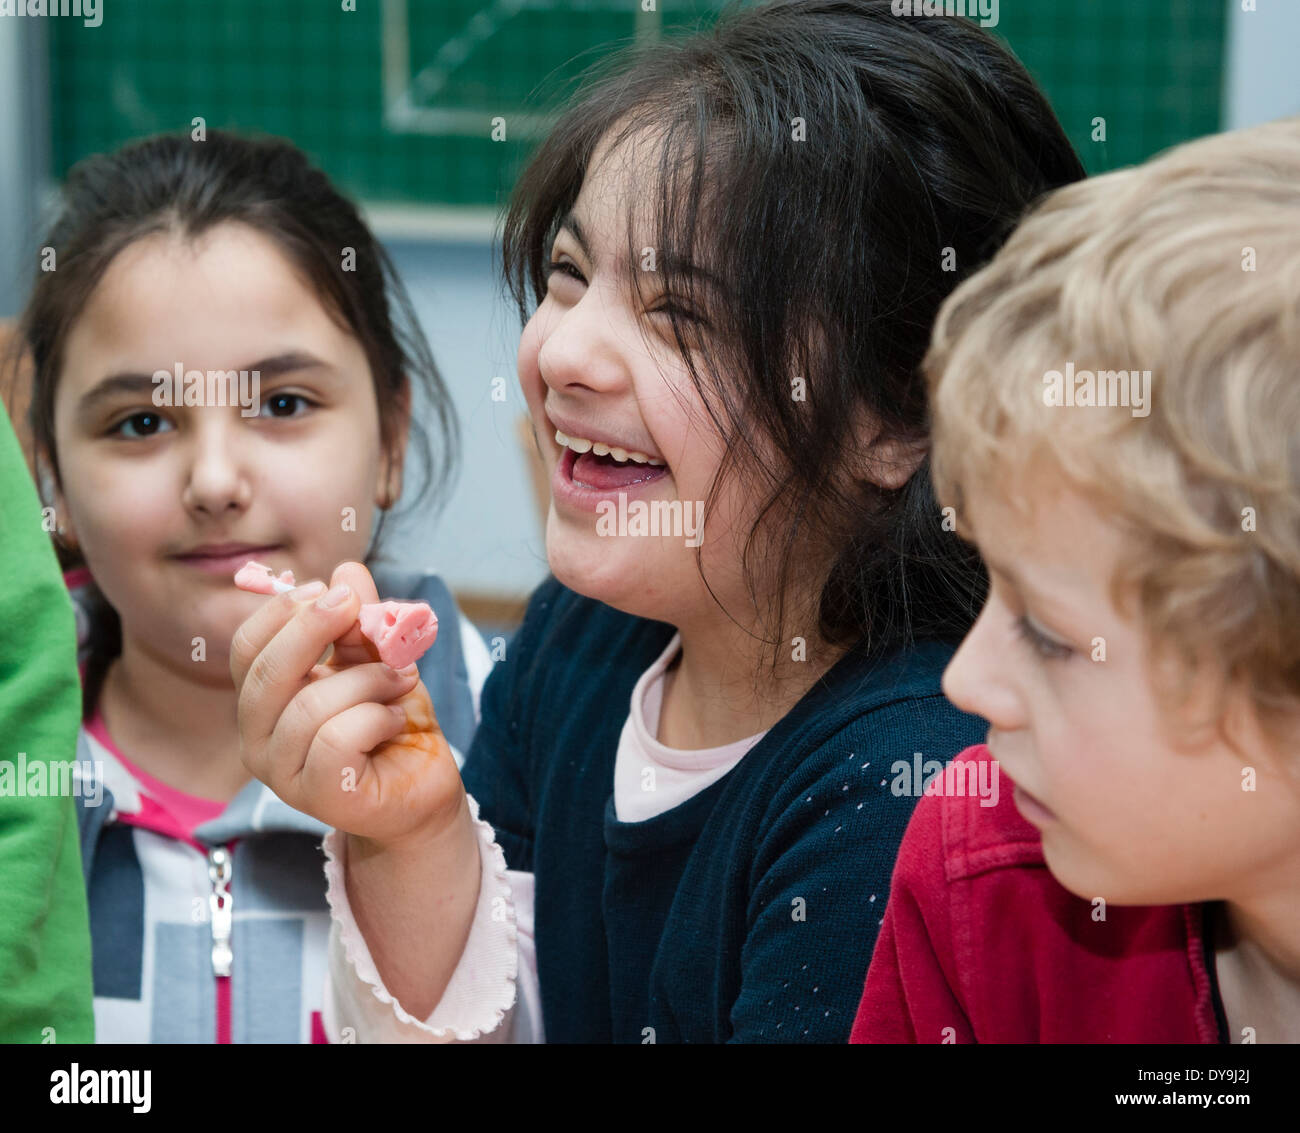 Non-disabled and disabled pupils (in this case a girl suffering from Down's syndrome) learn together in the same classroom. Stock Photo